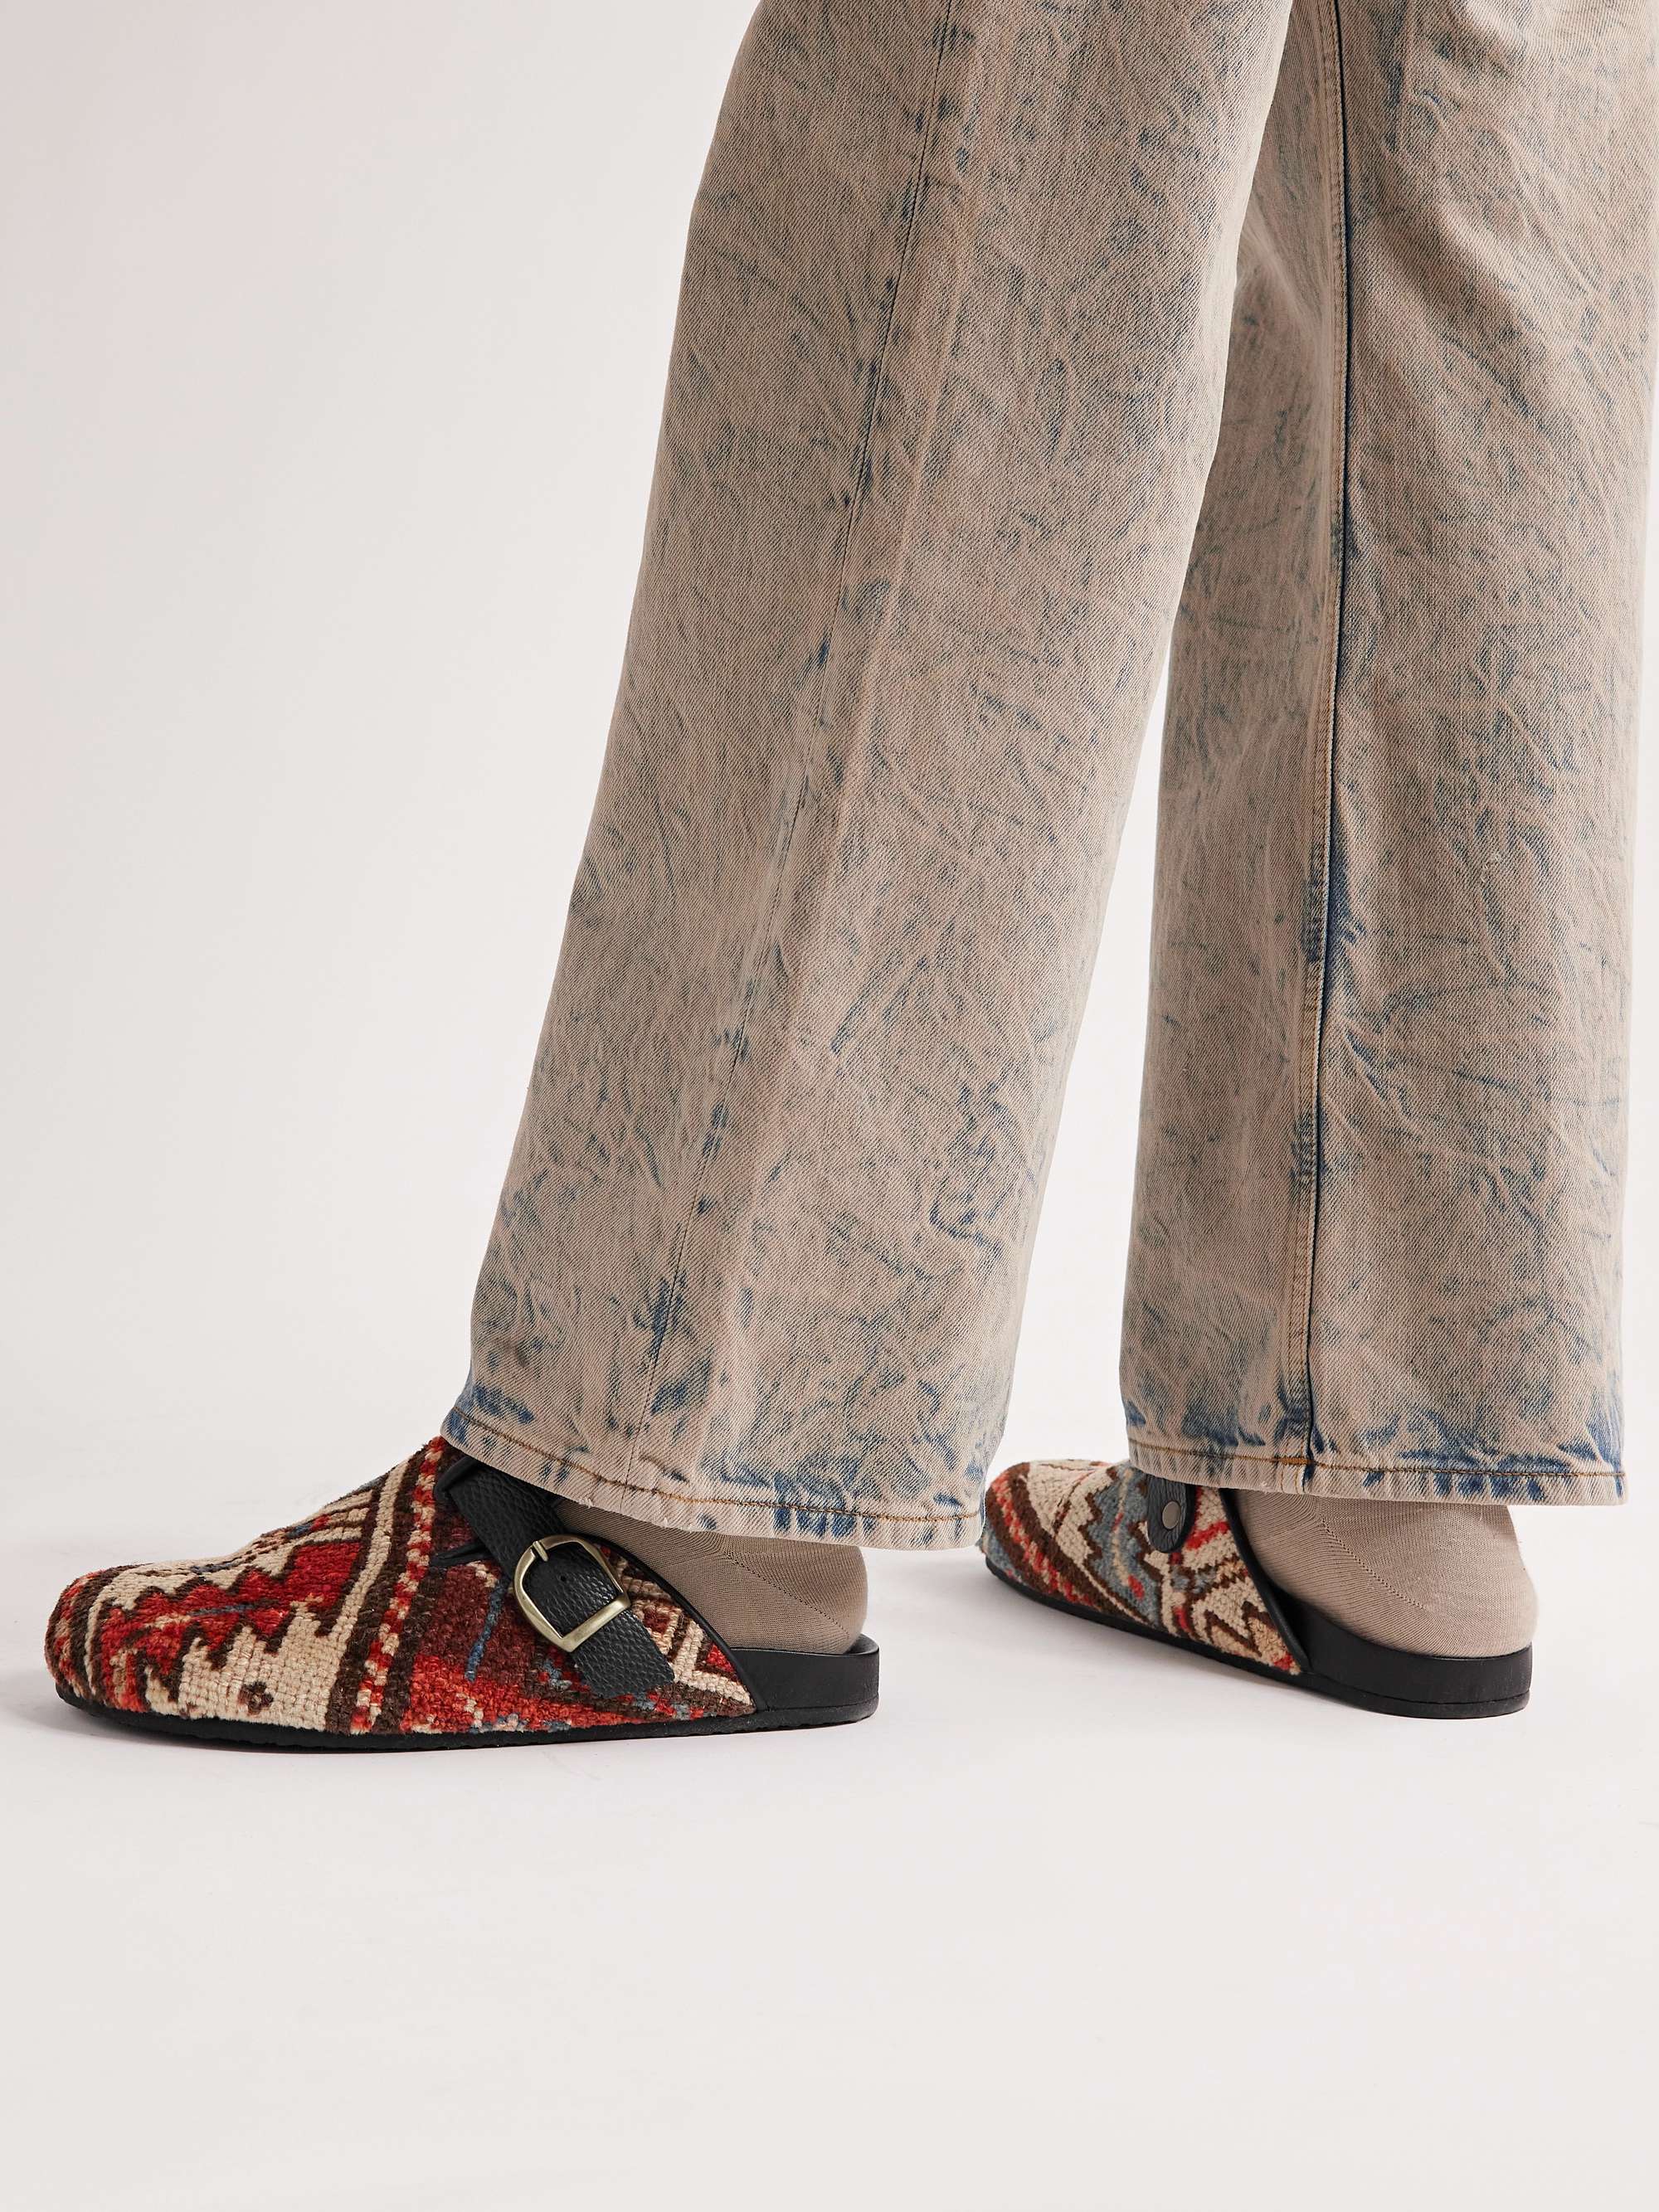 KING KENNEDY RUGS Upcycled Leather-Trimmed Wool Mules | MR PORTER